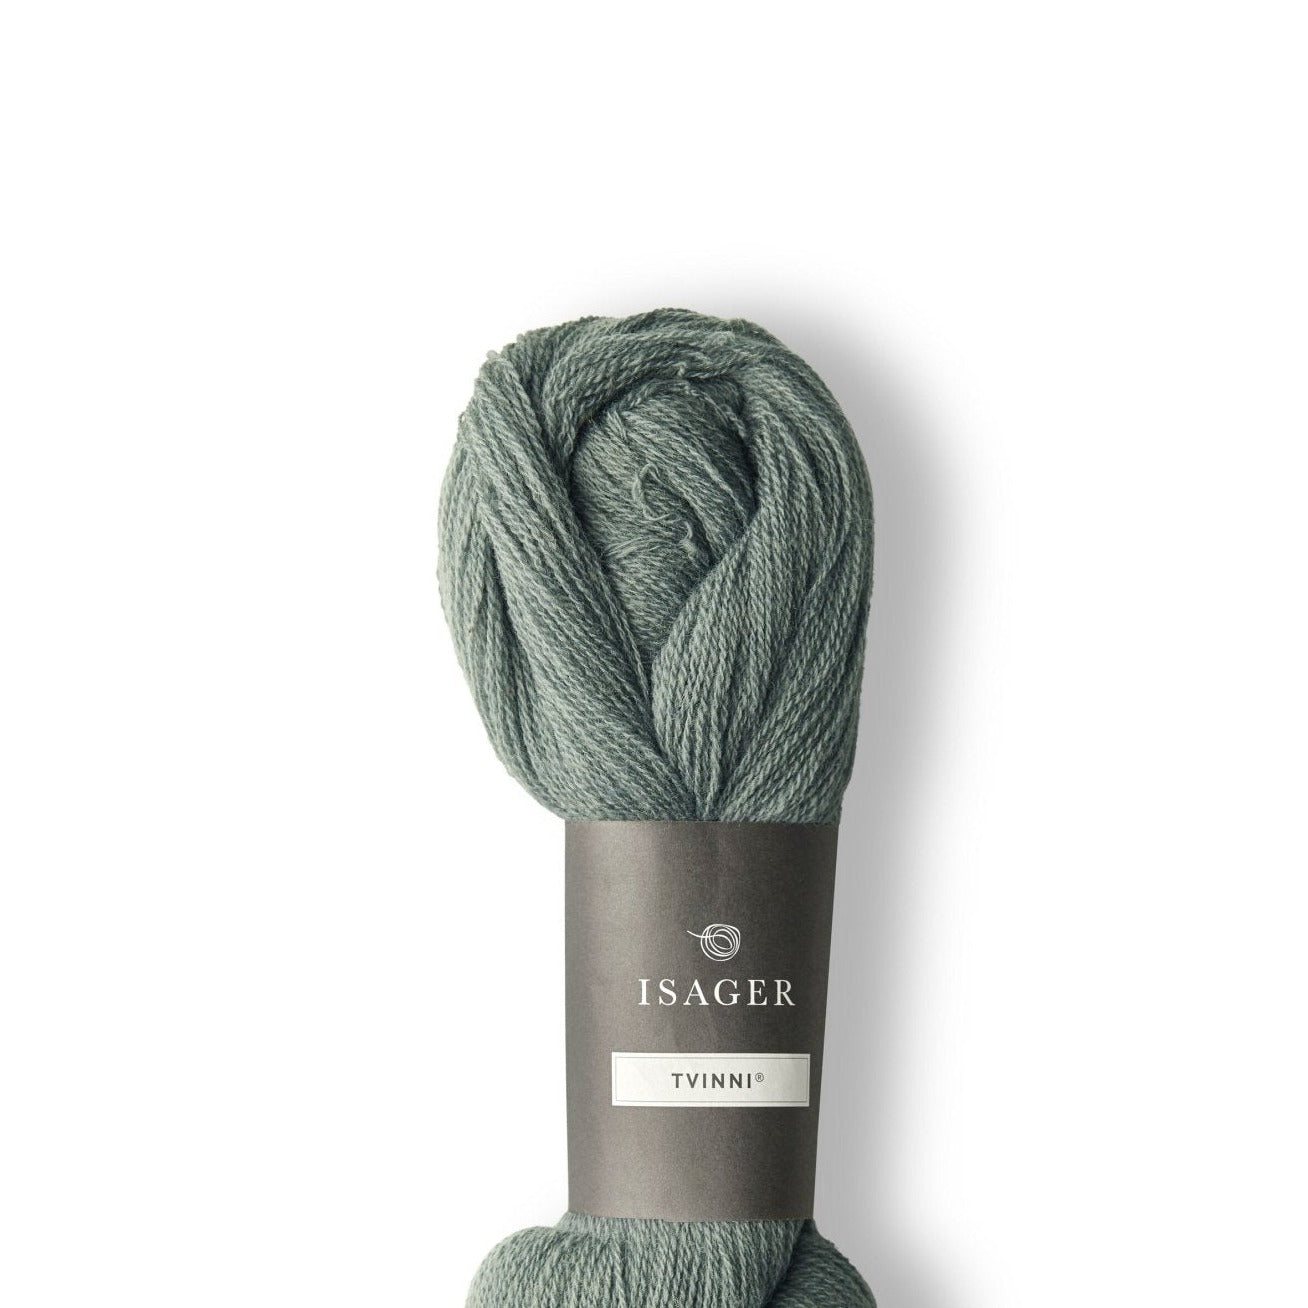 Isager Tvinni - 42 - 4 Ply - Isager - The Little Yarn Store